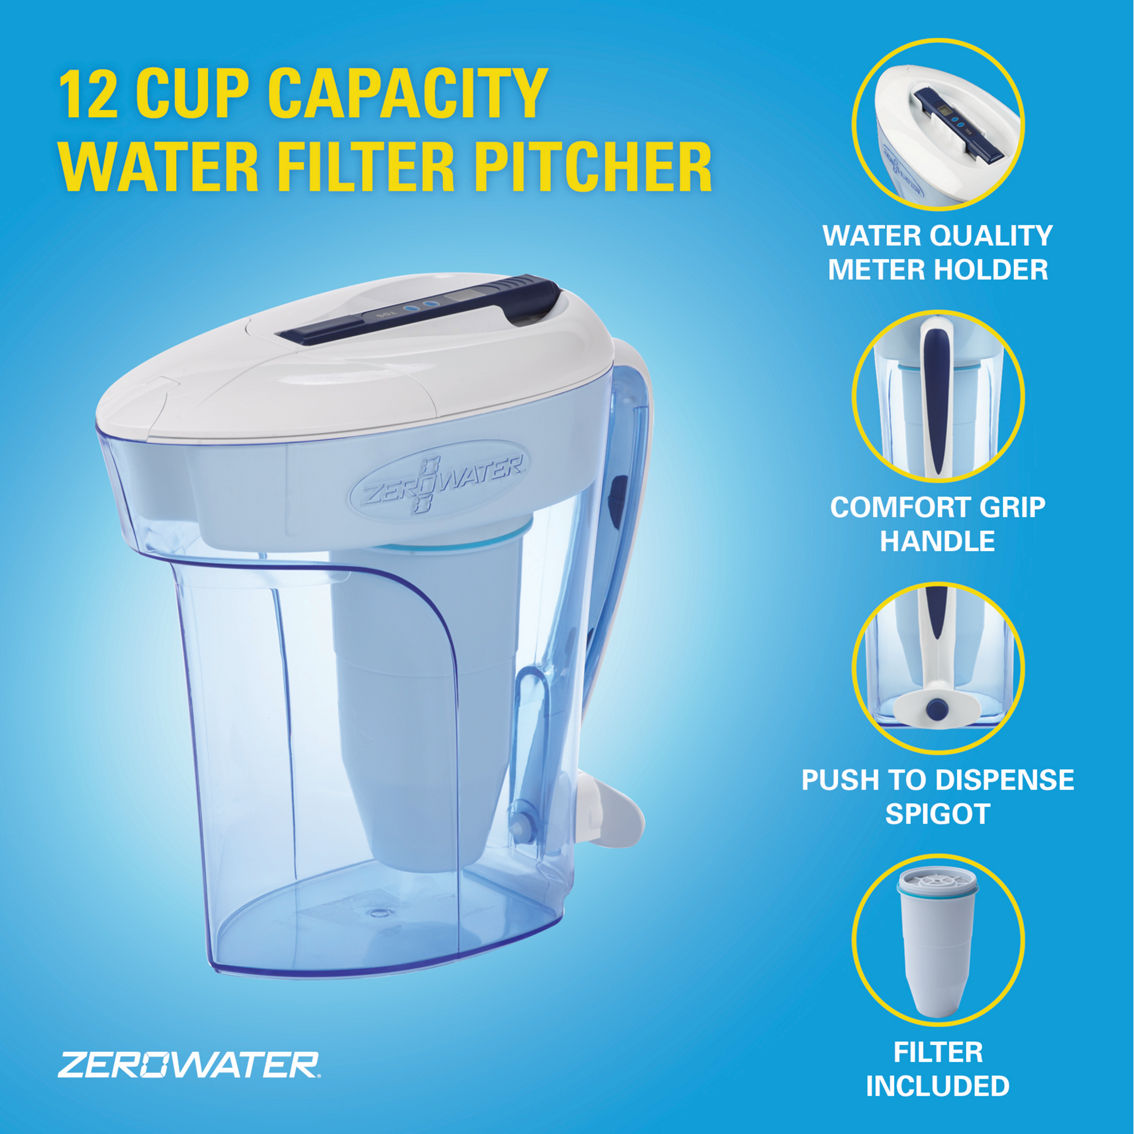 ZeroWater 12 Cup Ready Pour Pitcher - Image 6 of 6